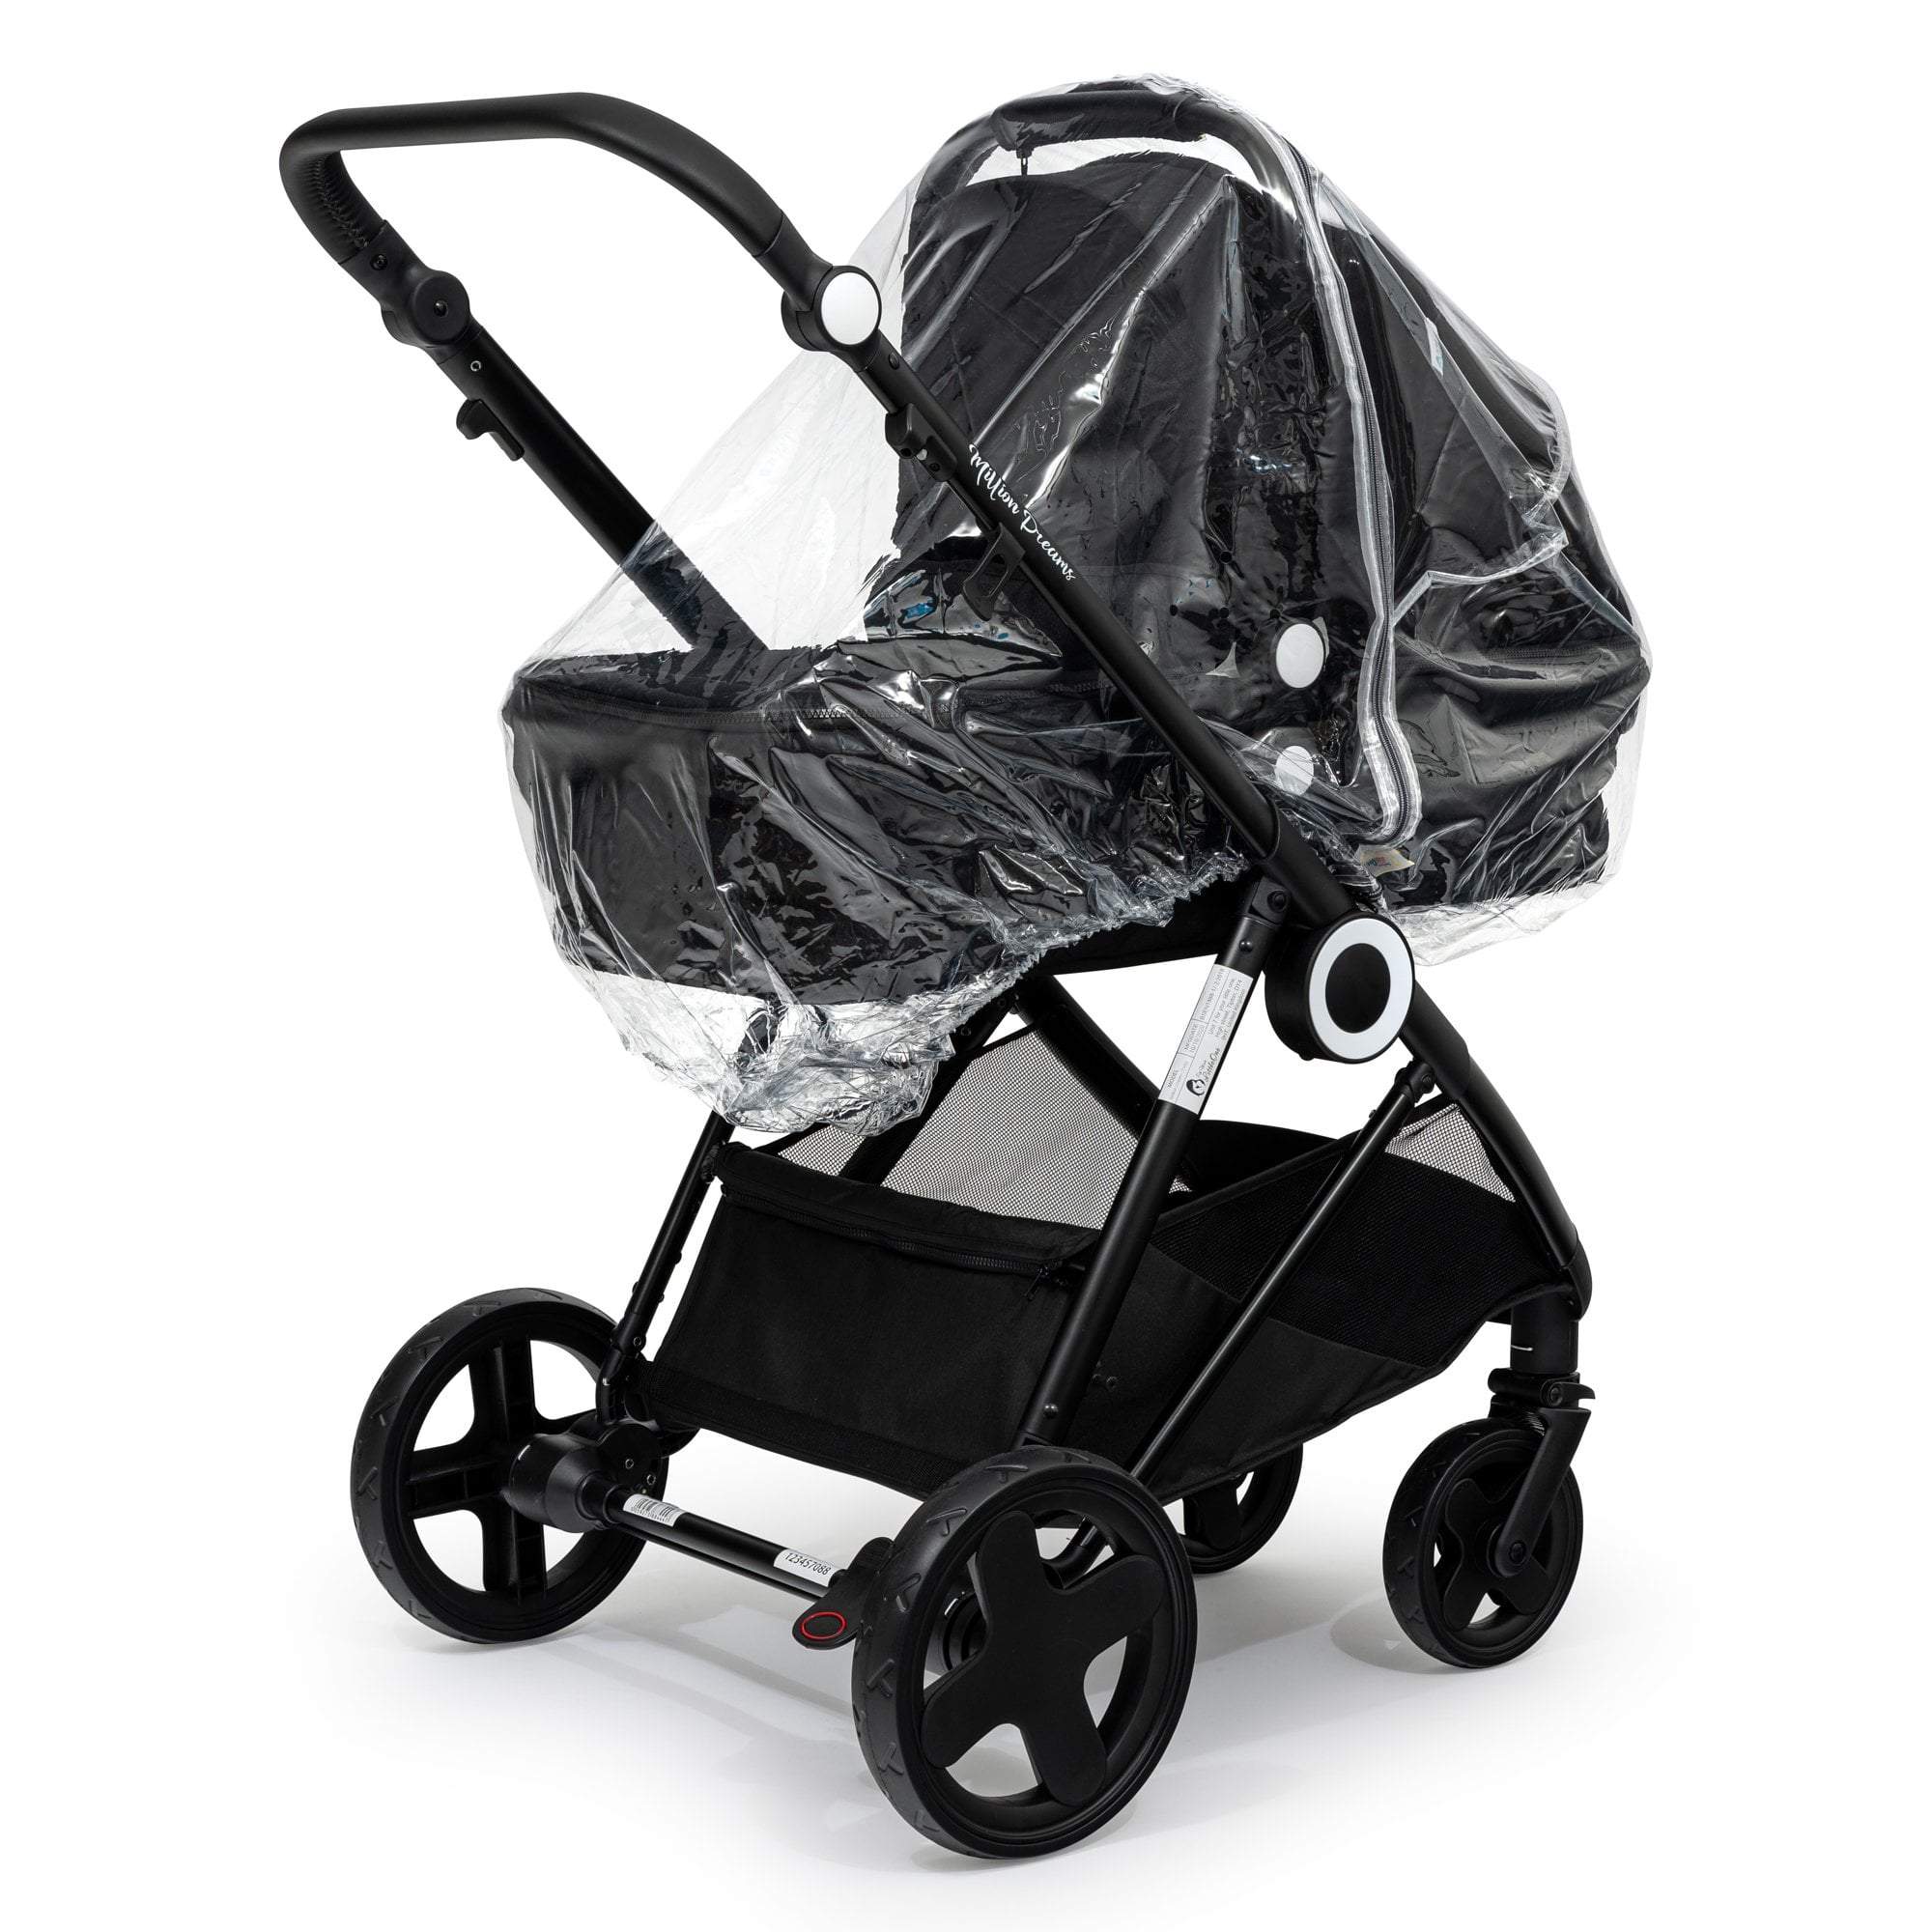 Carrycot Raincover Compatible With Safety 1st - Fits All Models - For Your Little One